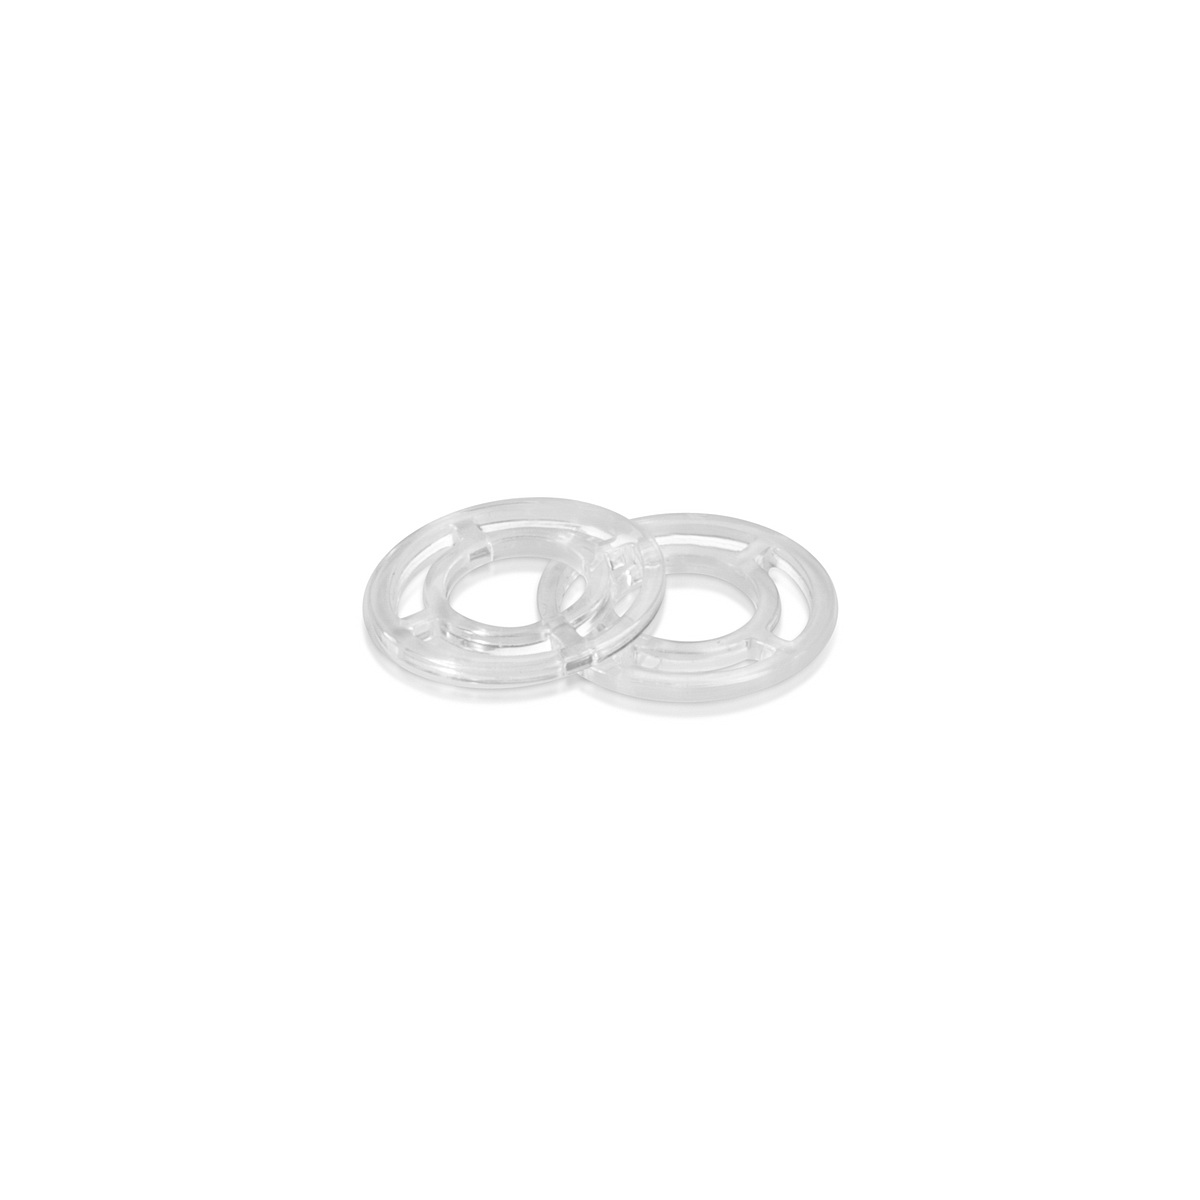 Silicone Washer, 7/8'' OD x 5/16'' ID x 0.05'' Thick. (For M8 or 5/16'' Stud)